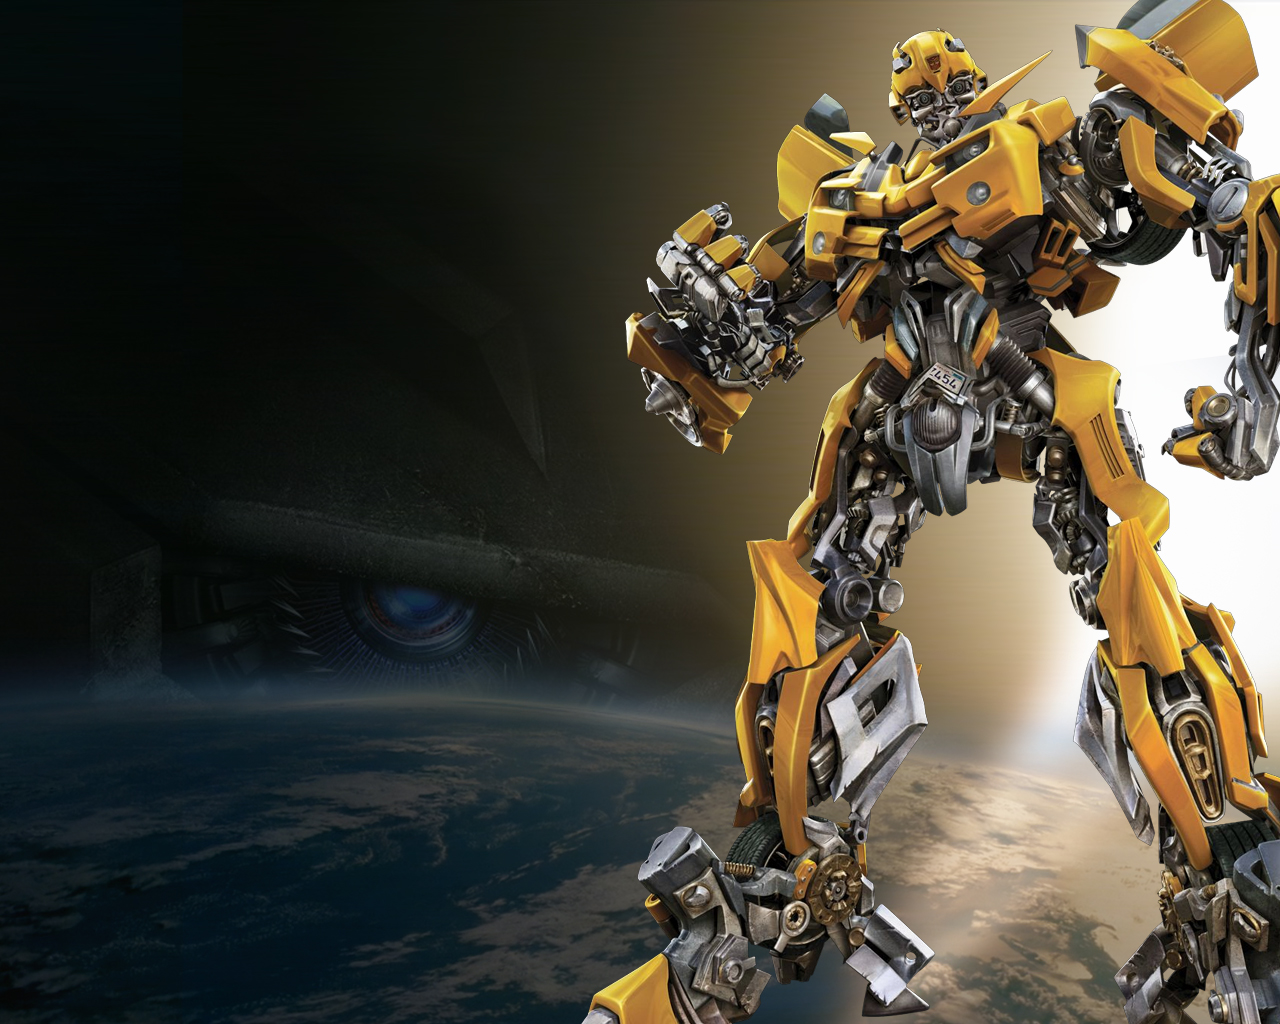 Transformers Wallpapers Photos beautifully pictured on Digital Photo 1280x1024